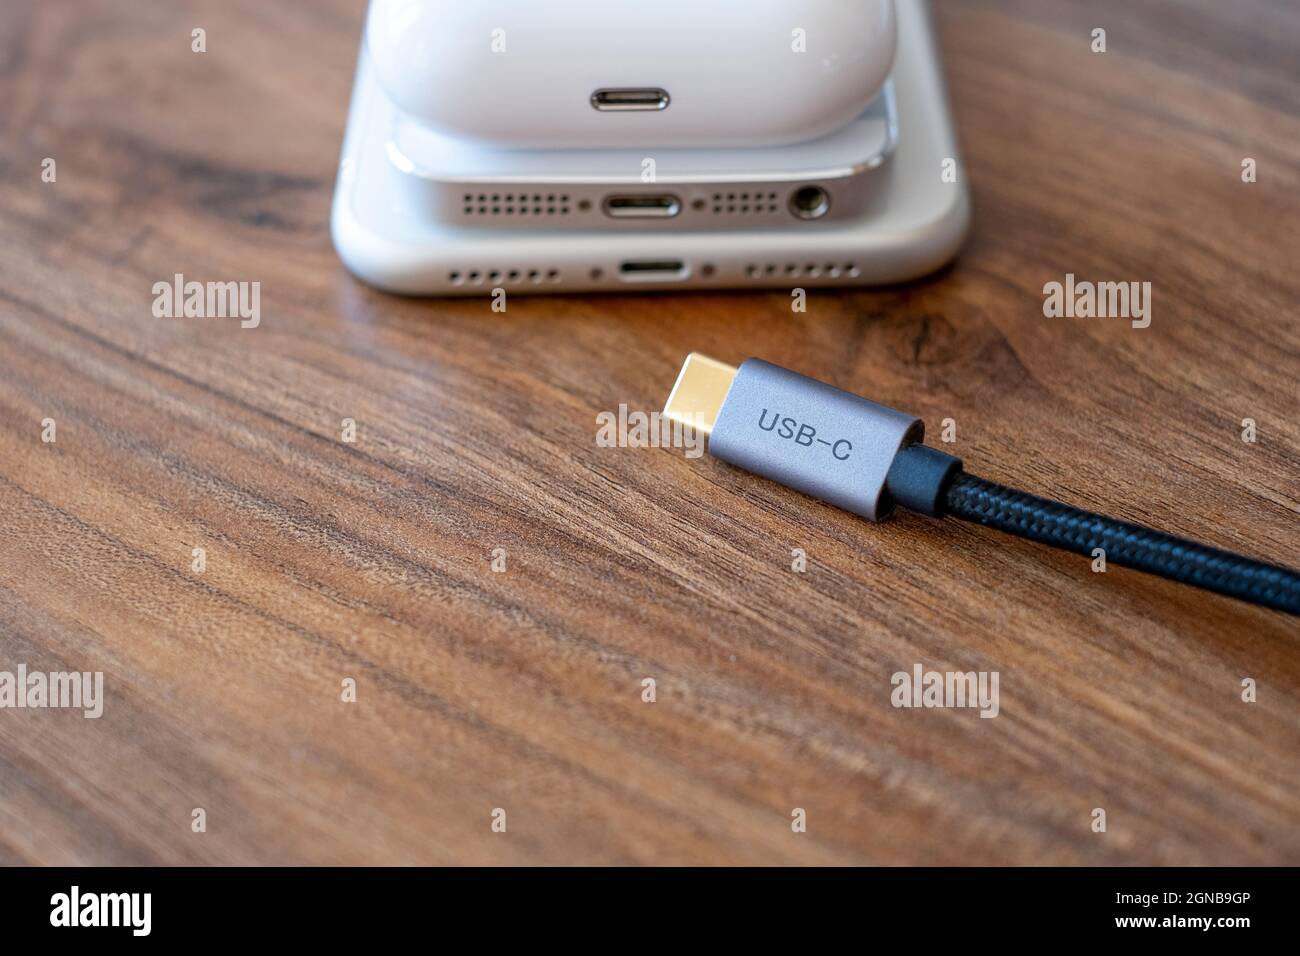 Trying to put type-c  or usb-c on mobile phone. Smartphones headphones and type c cable on the table Stock Photo